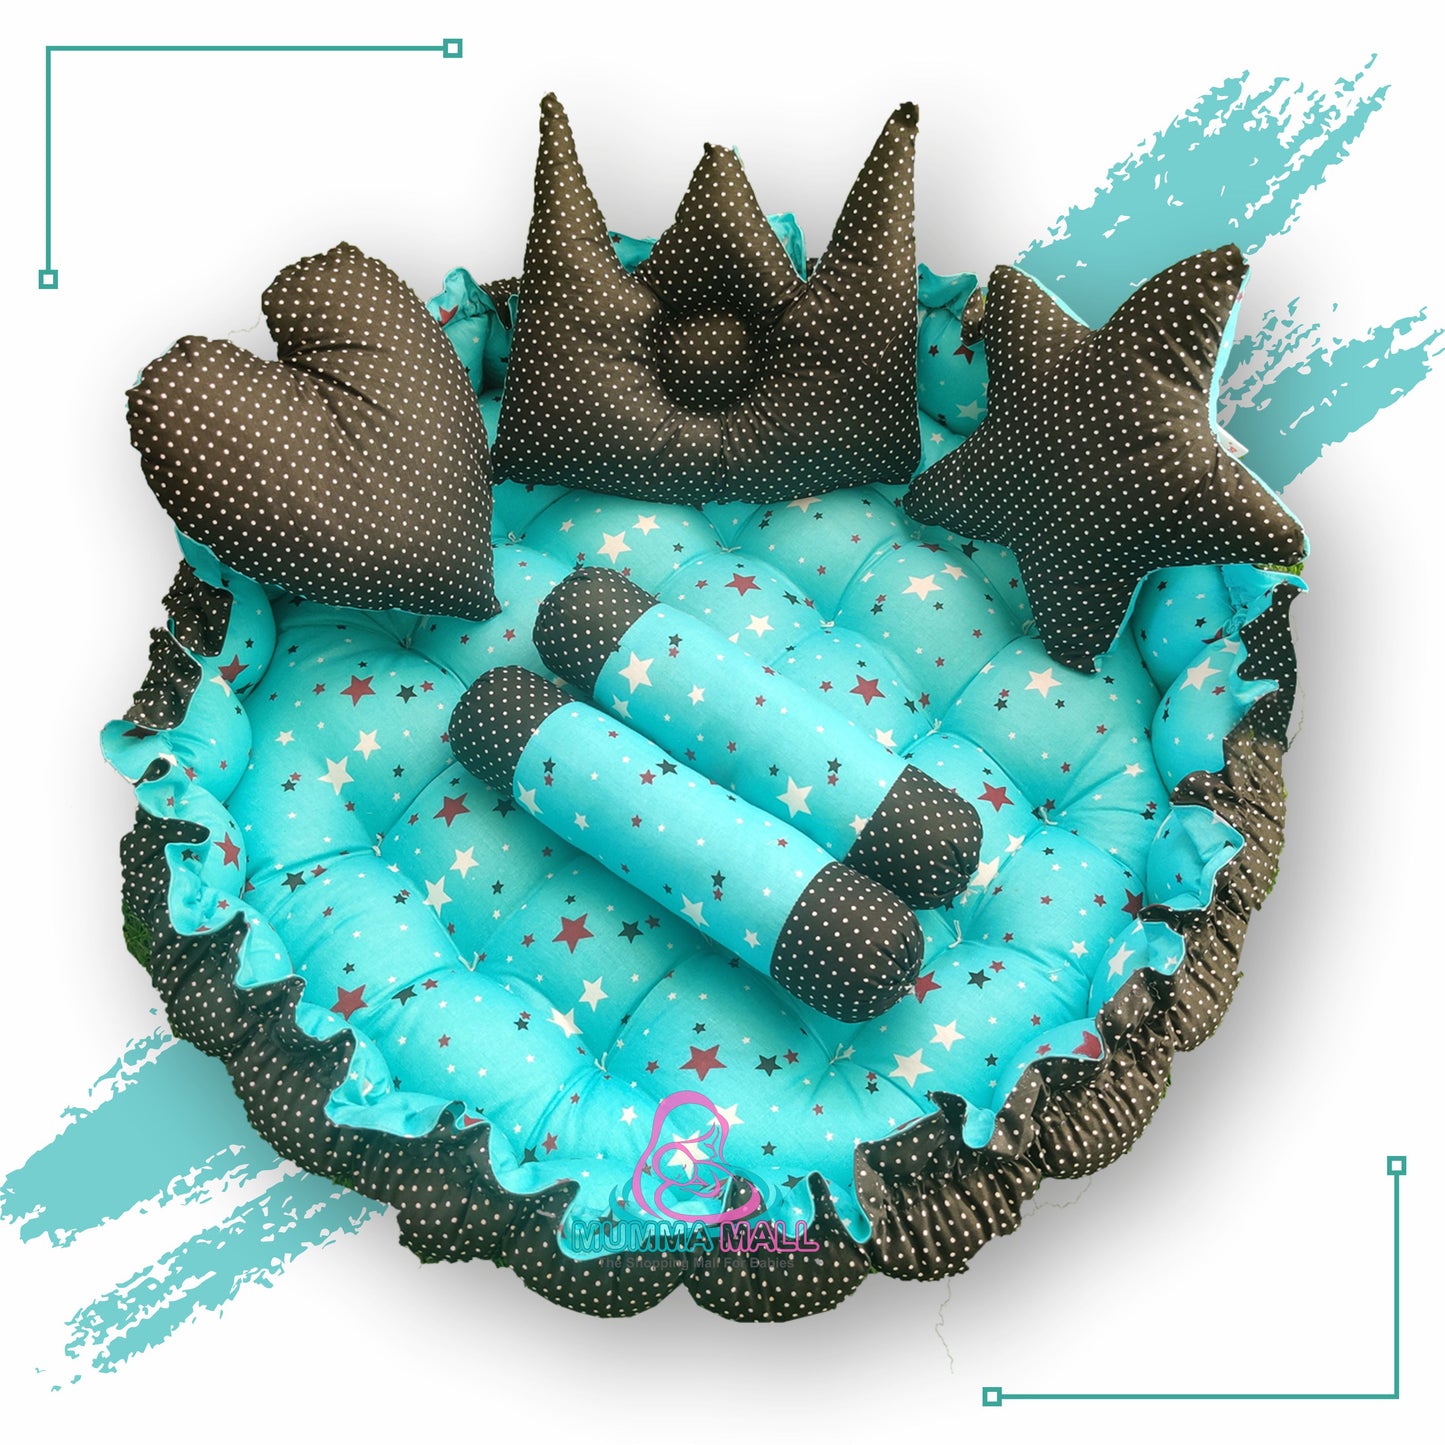 Round baby tub bed with blanket and set of 5 pillows as neck support, side support and toy (Turquoise and Black)